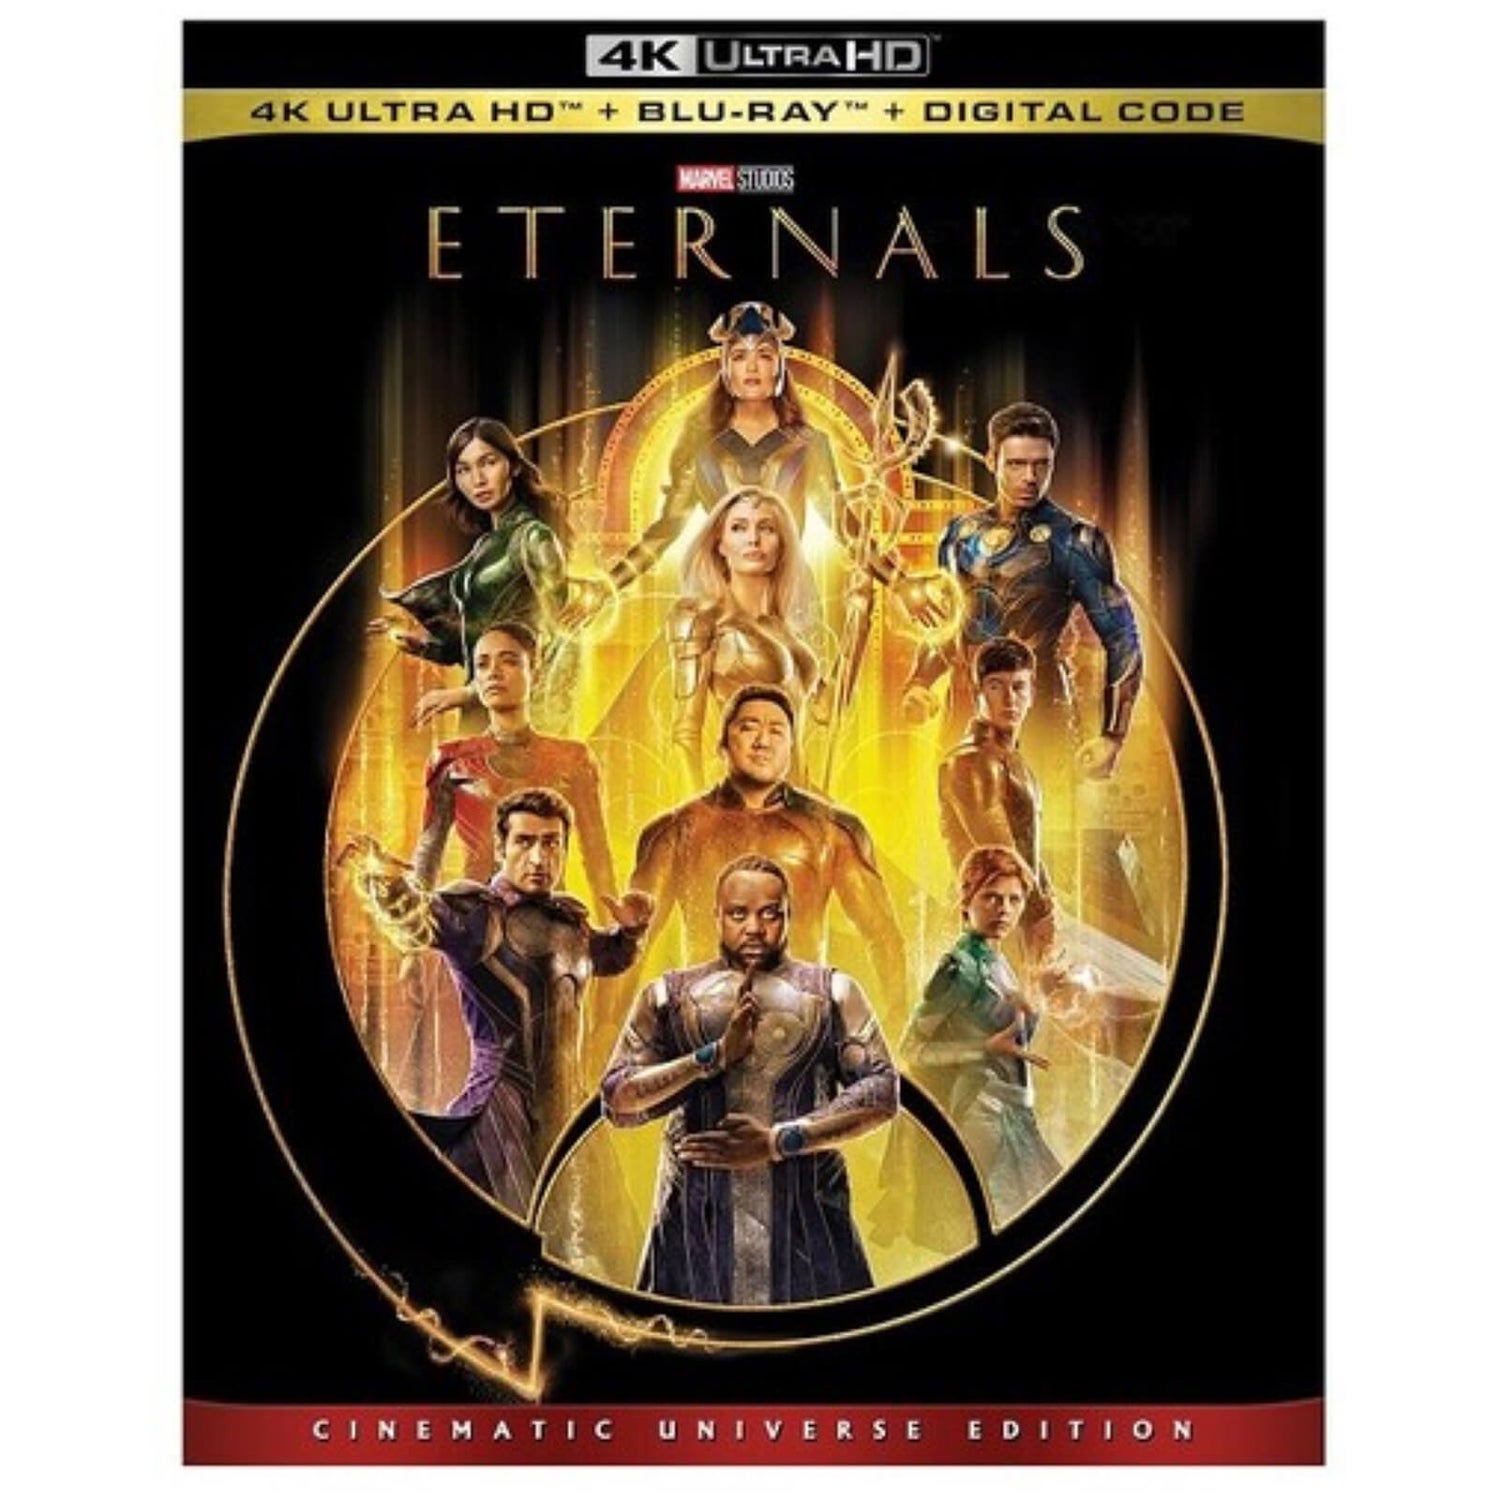 Eternals: Cinematic Universe Edition - 4K Ultra HD (Includes Blu-ray) (US Import)